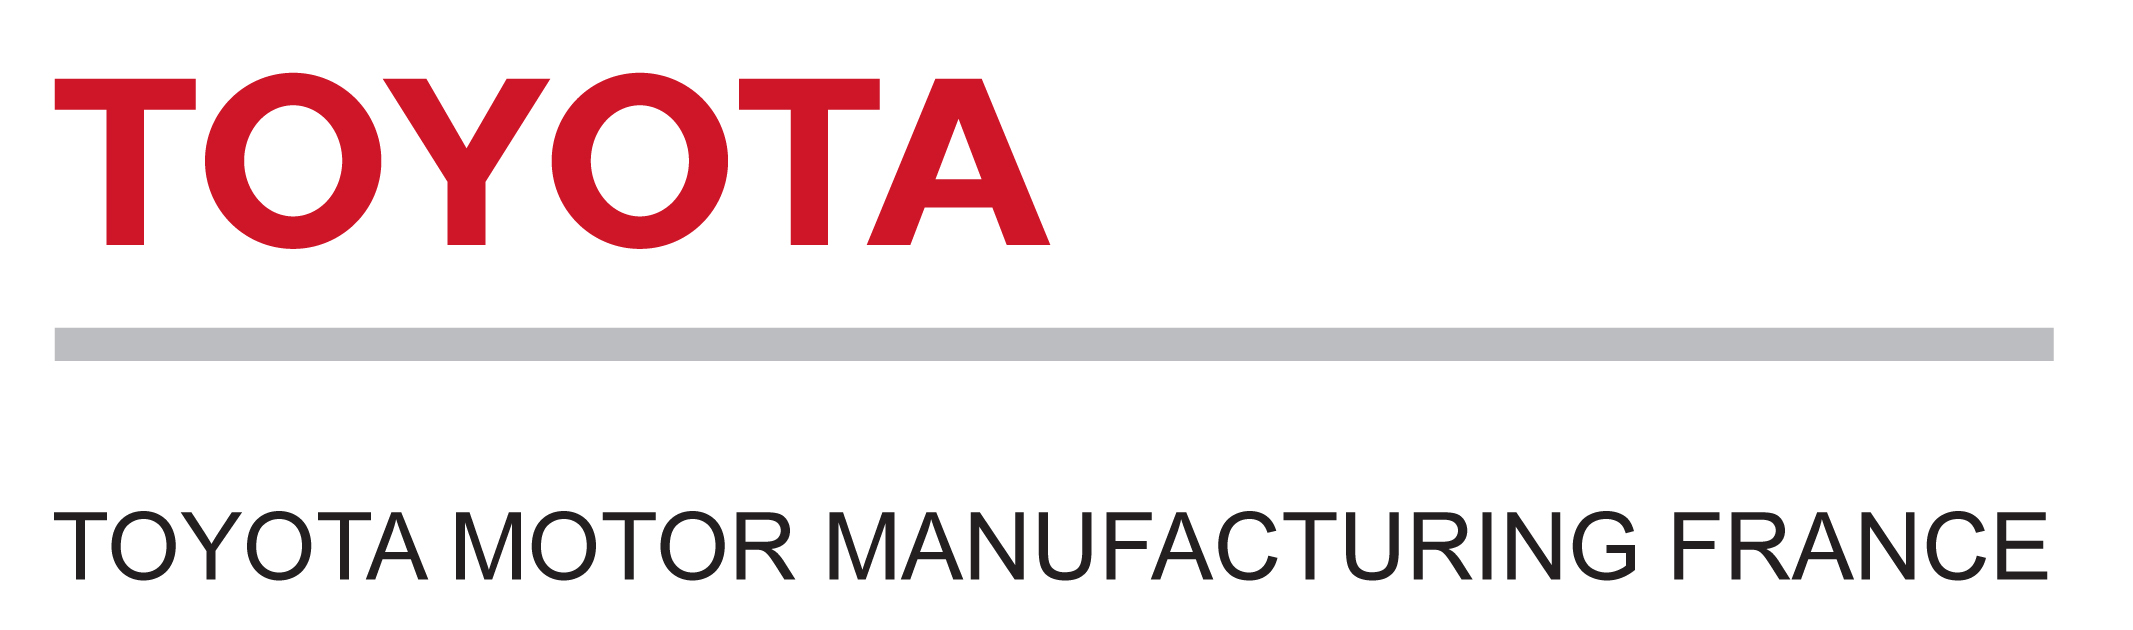 Toyota Motor Manufacturing France (TMMF)